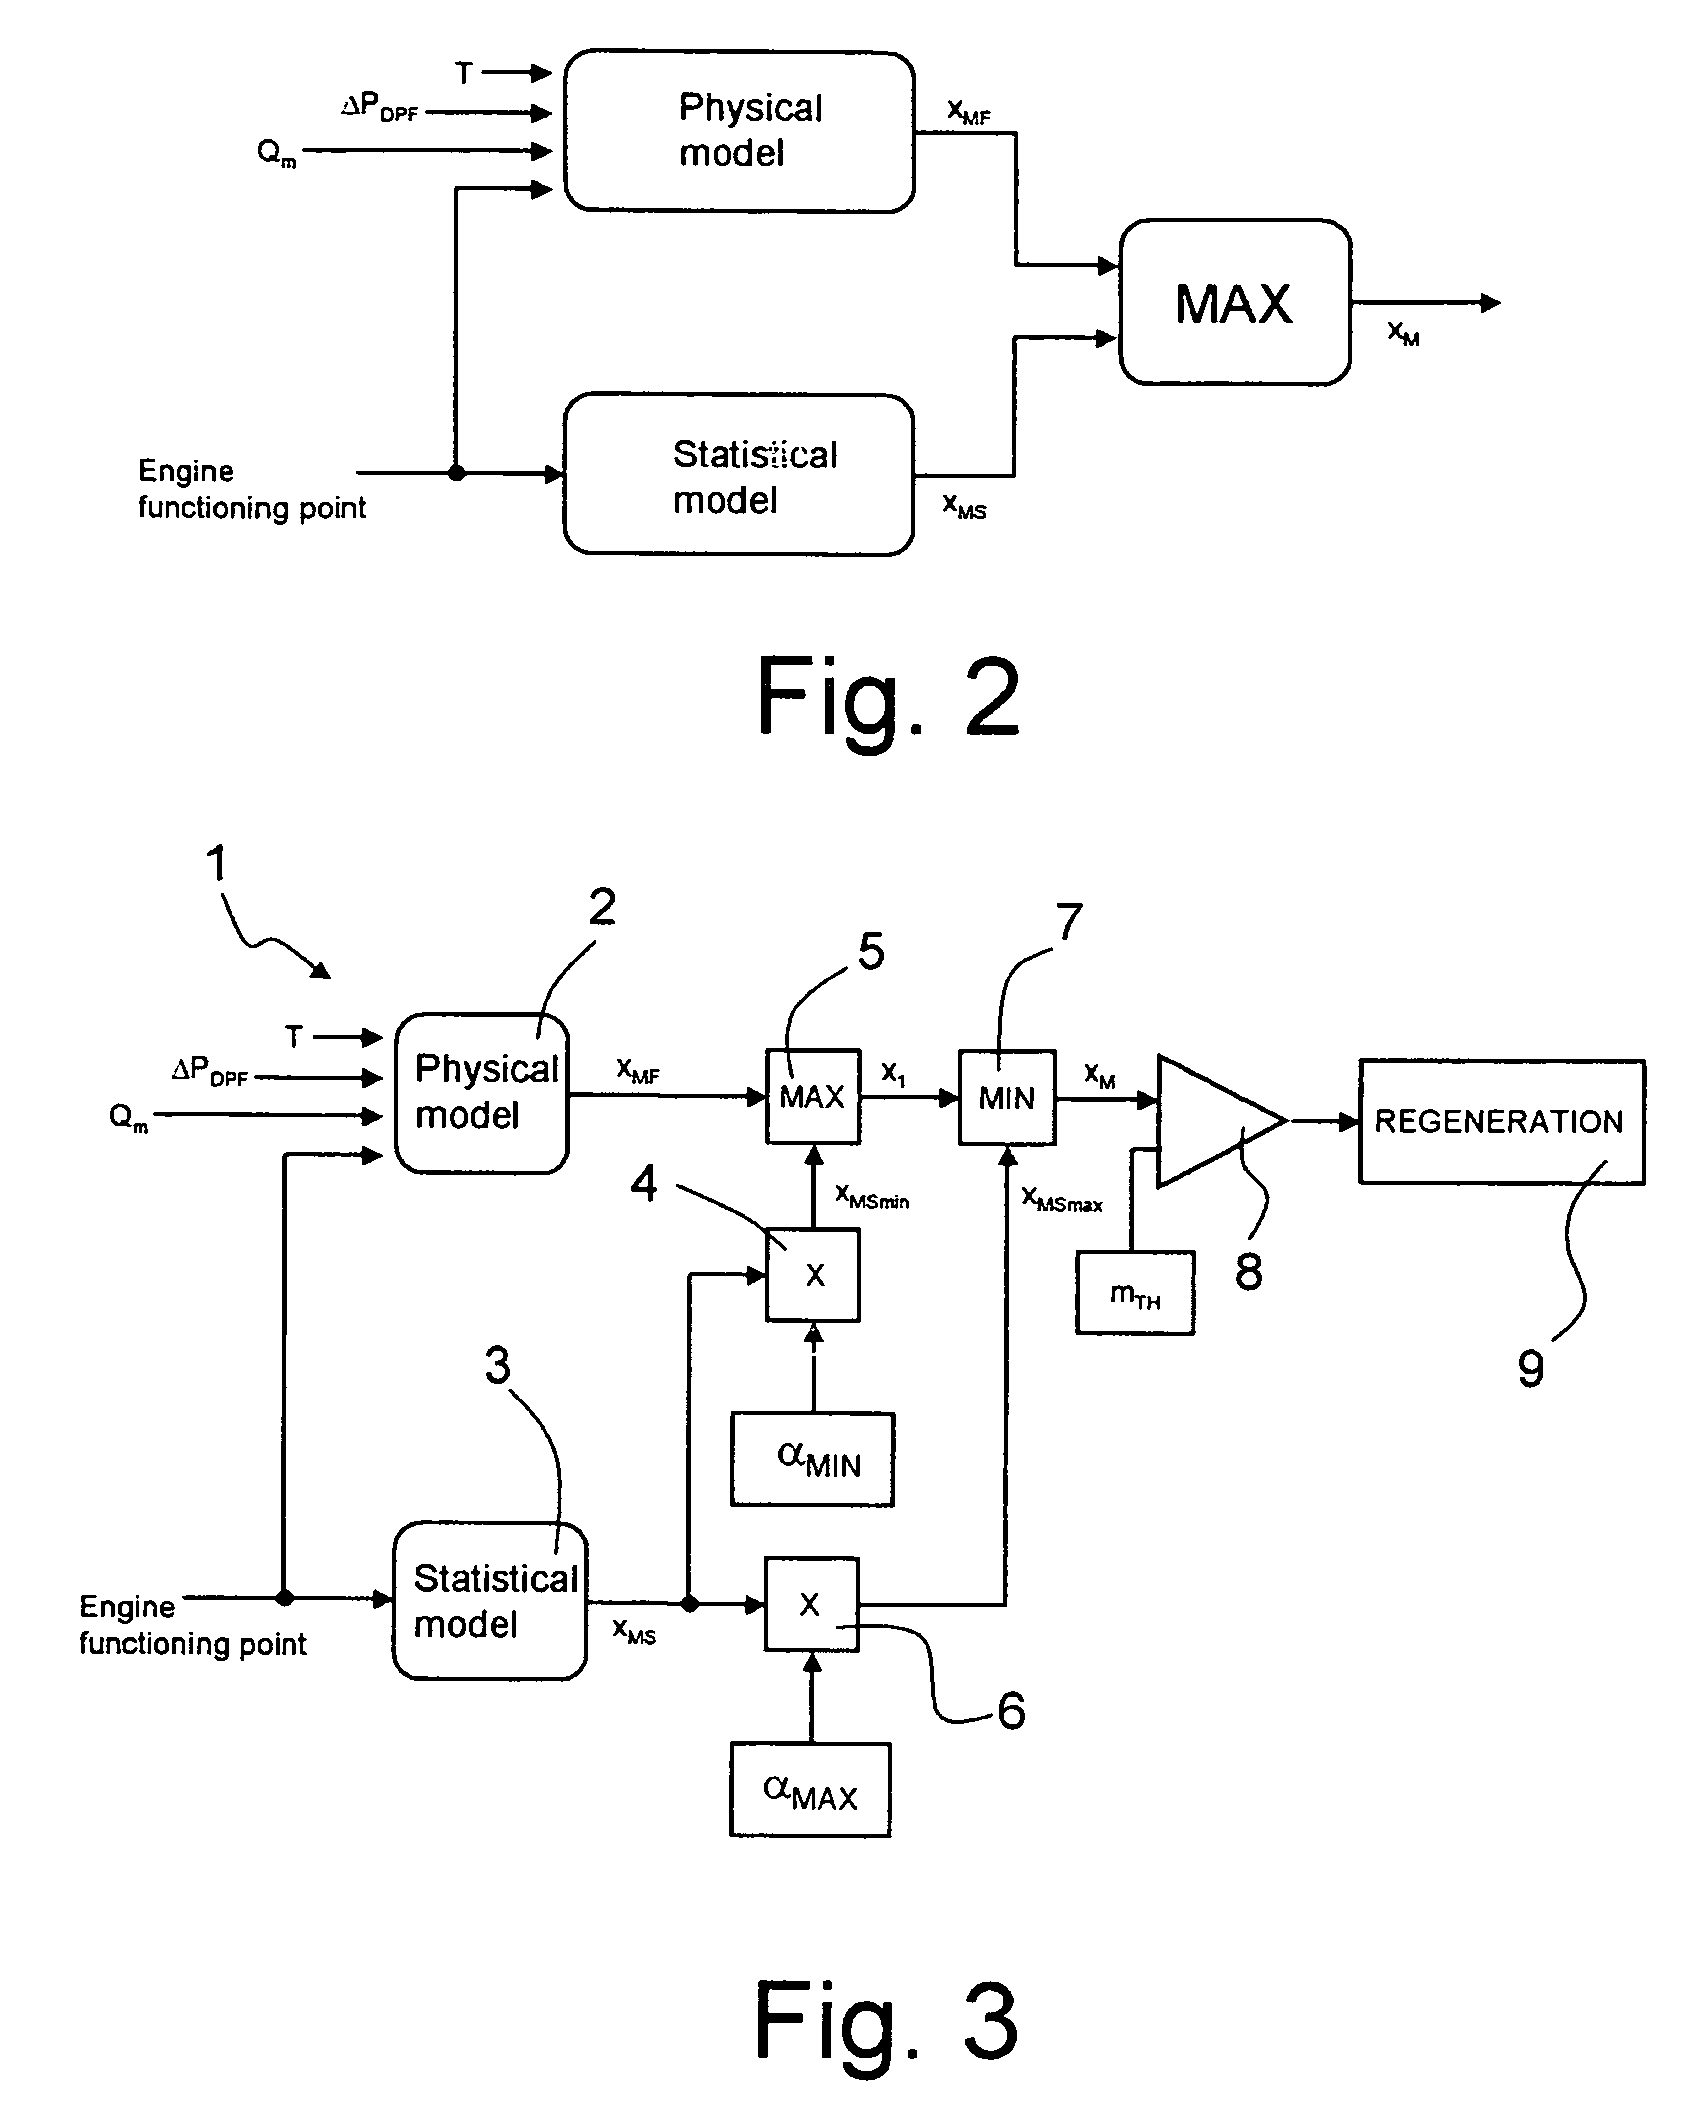 Method for activation of the regeneration of a particulate filter based on an estimate of the quantity of particulate accumulated in the particulate filter